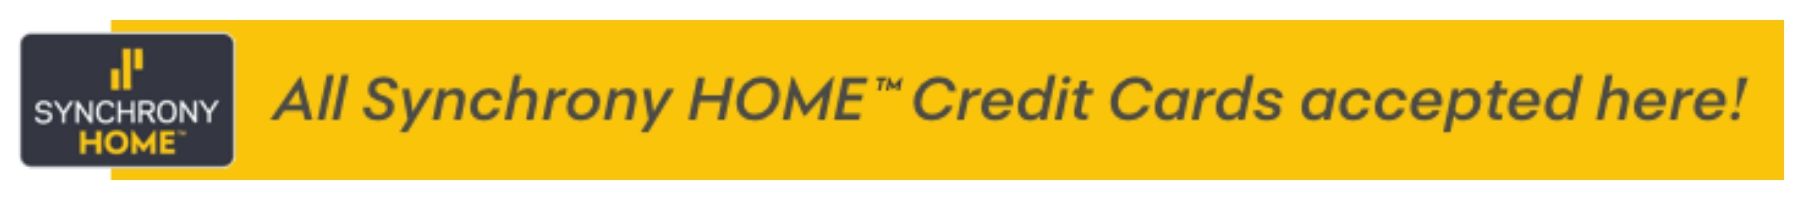 Synchrony Home Credit Card Banner